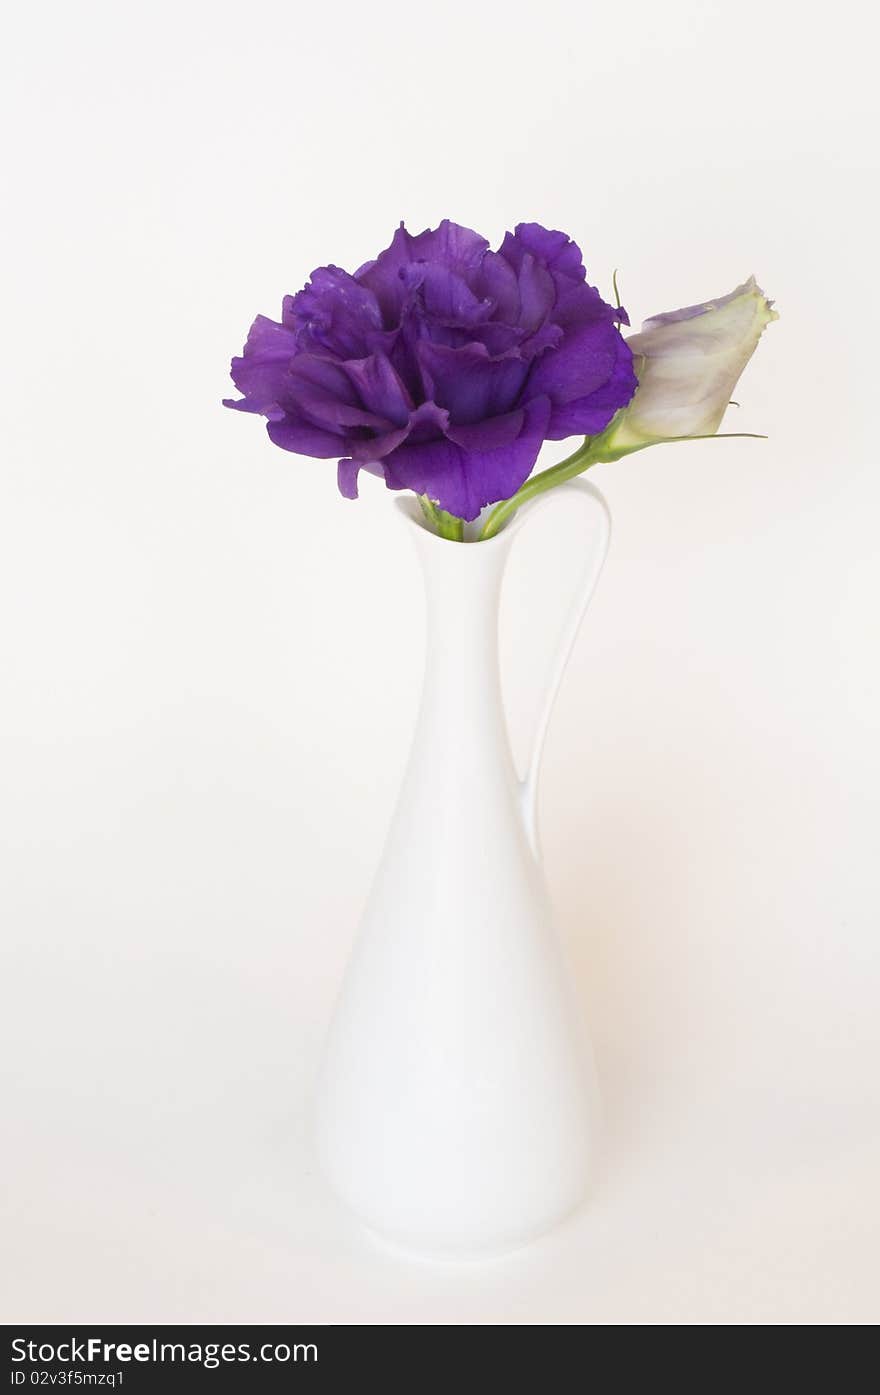 Flower and bud in a white vase on a white background.